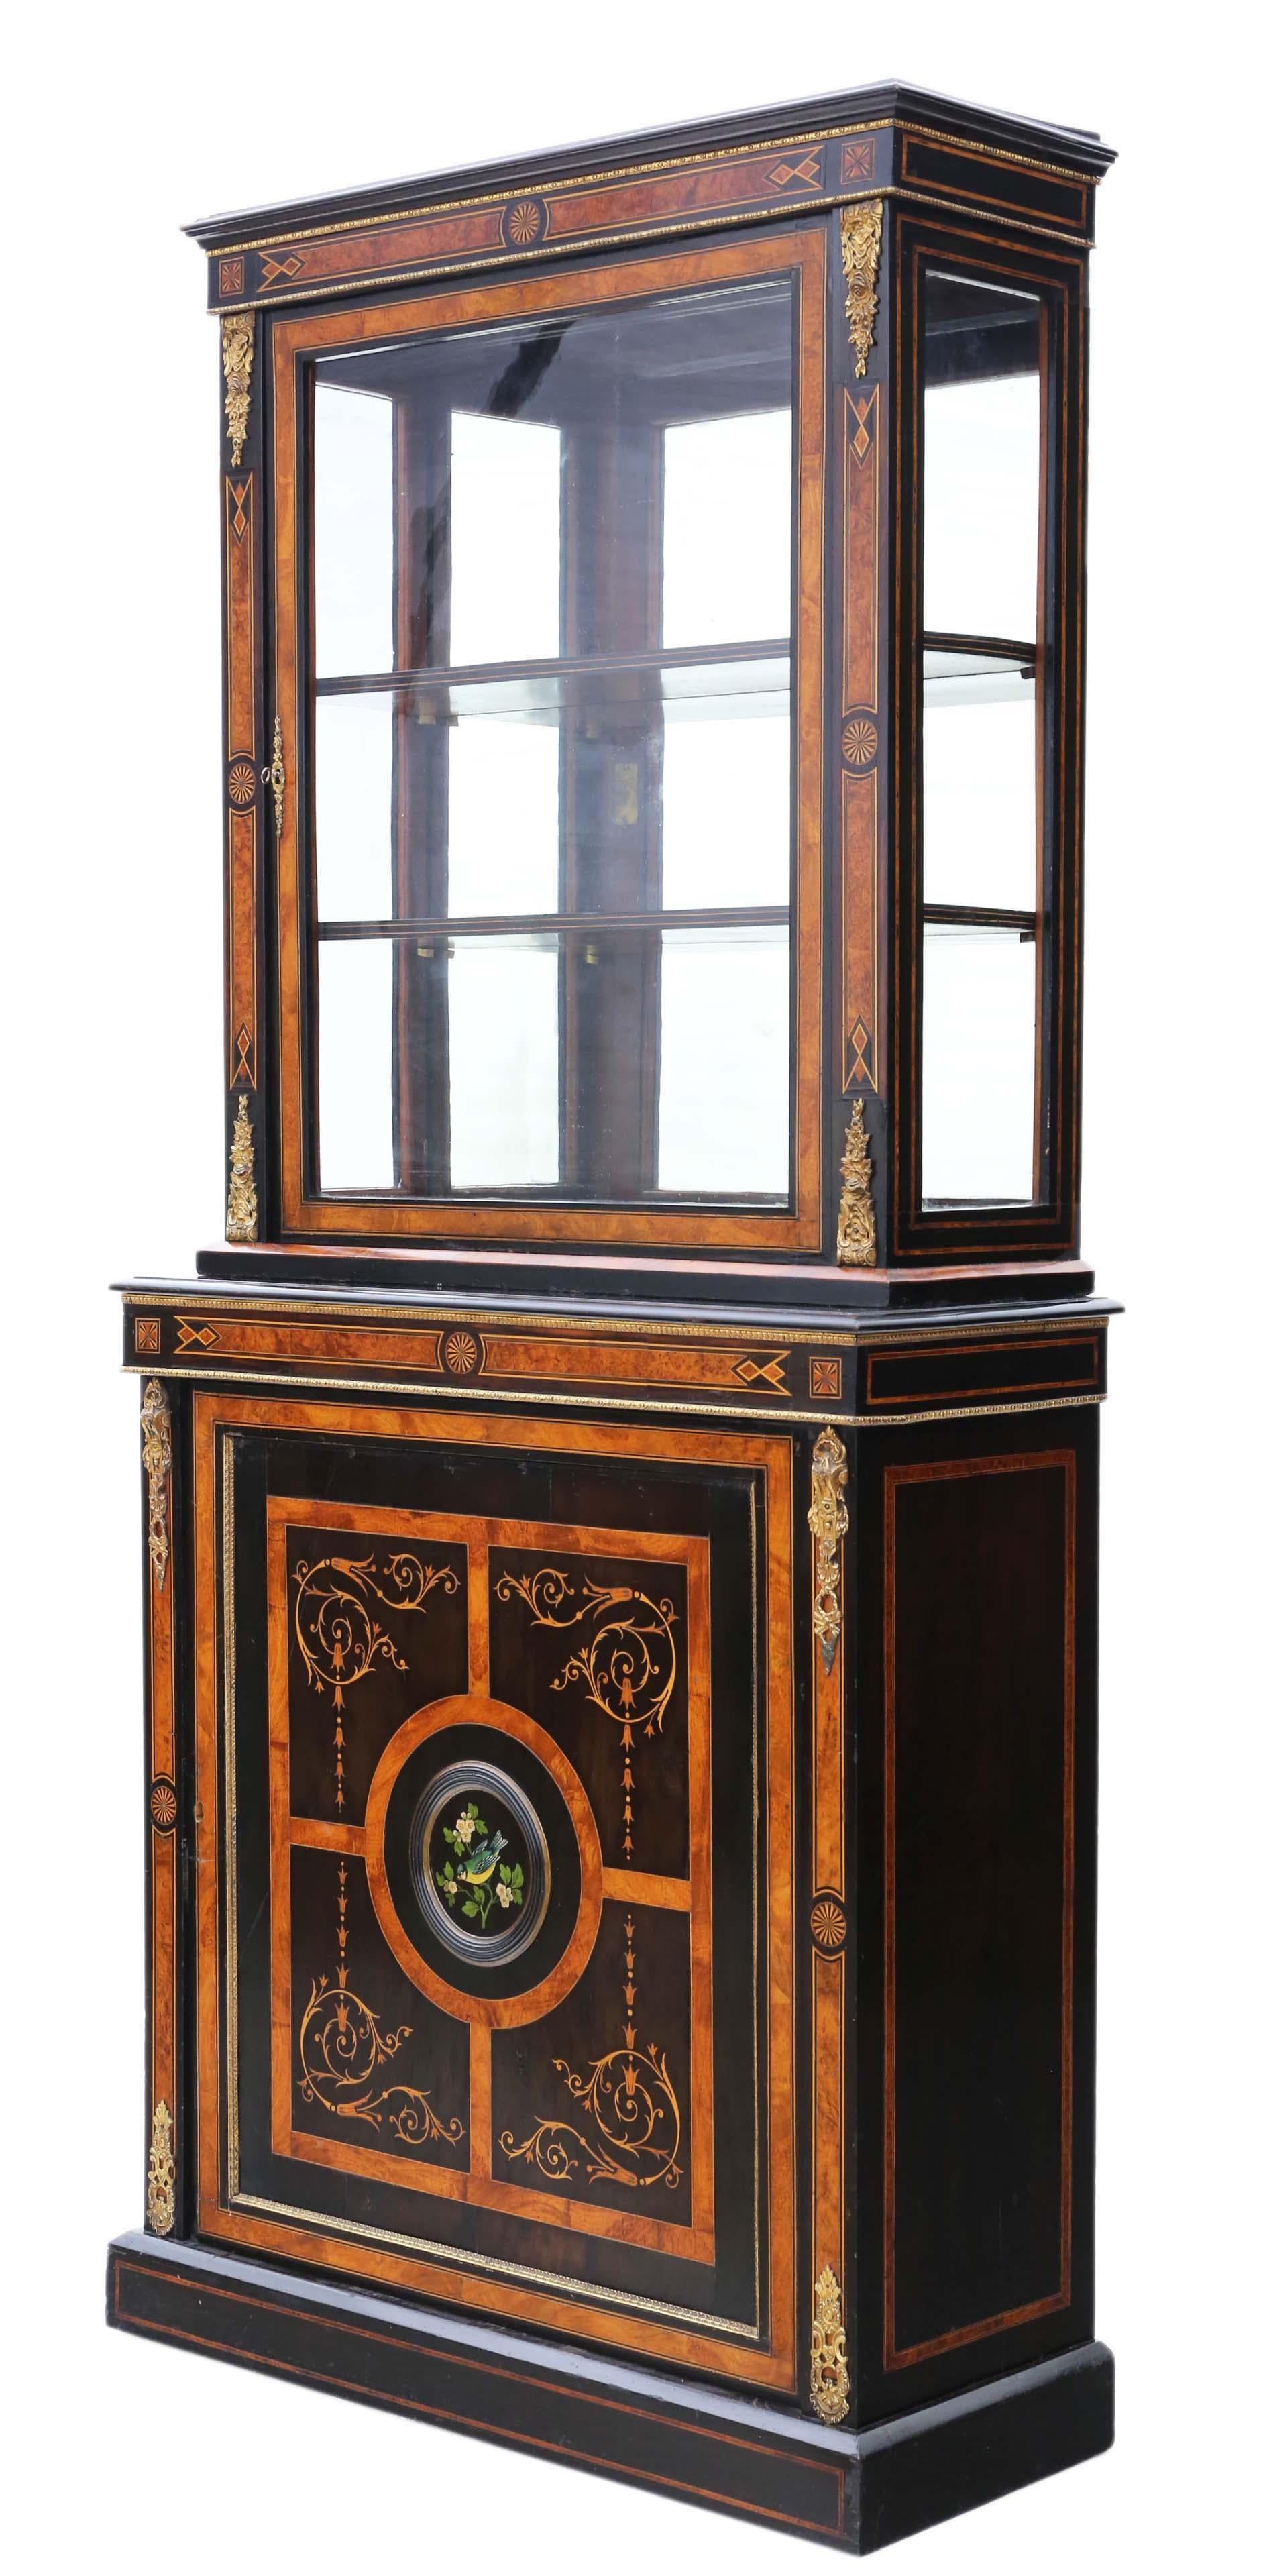 Antique, fine-quality 2-part pier display cabinet from the Victorian Aesthetic period, approximately dating back to 1880, crafted with amboyna and ebonized wood. This cabinet stands out as a very rare find, adorned with prolific detailed marquetry